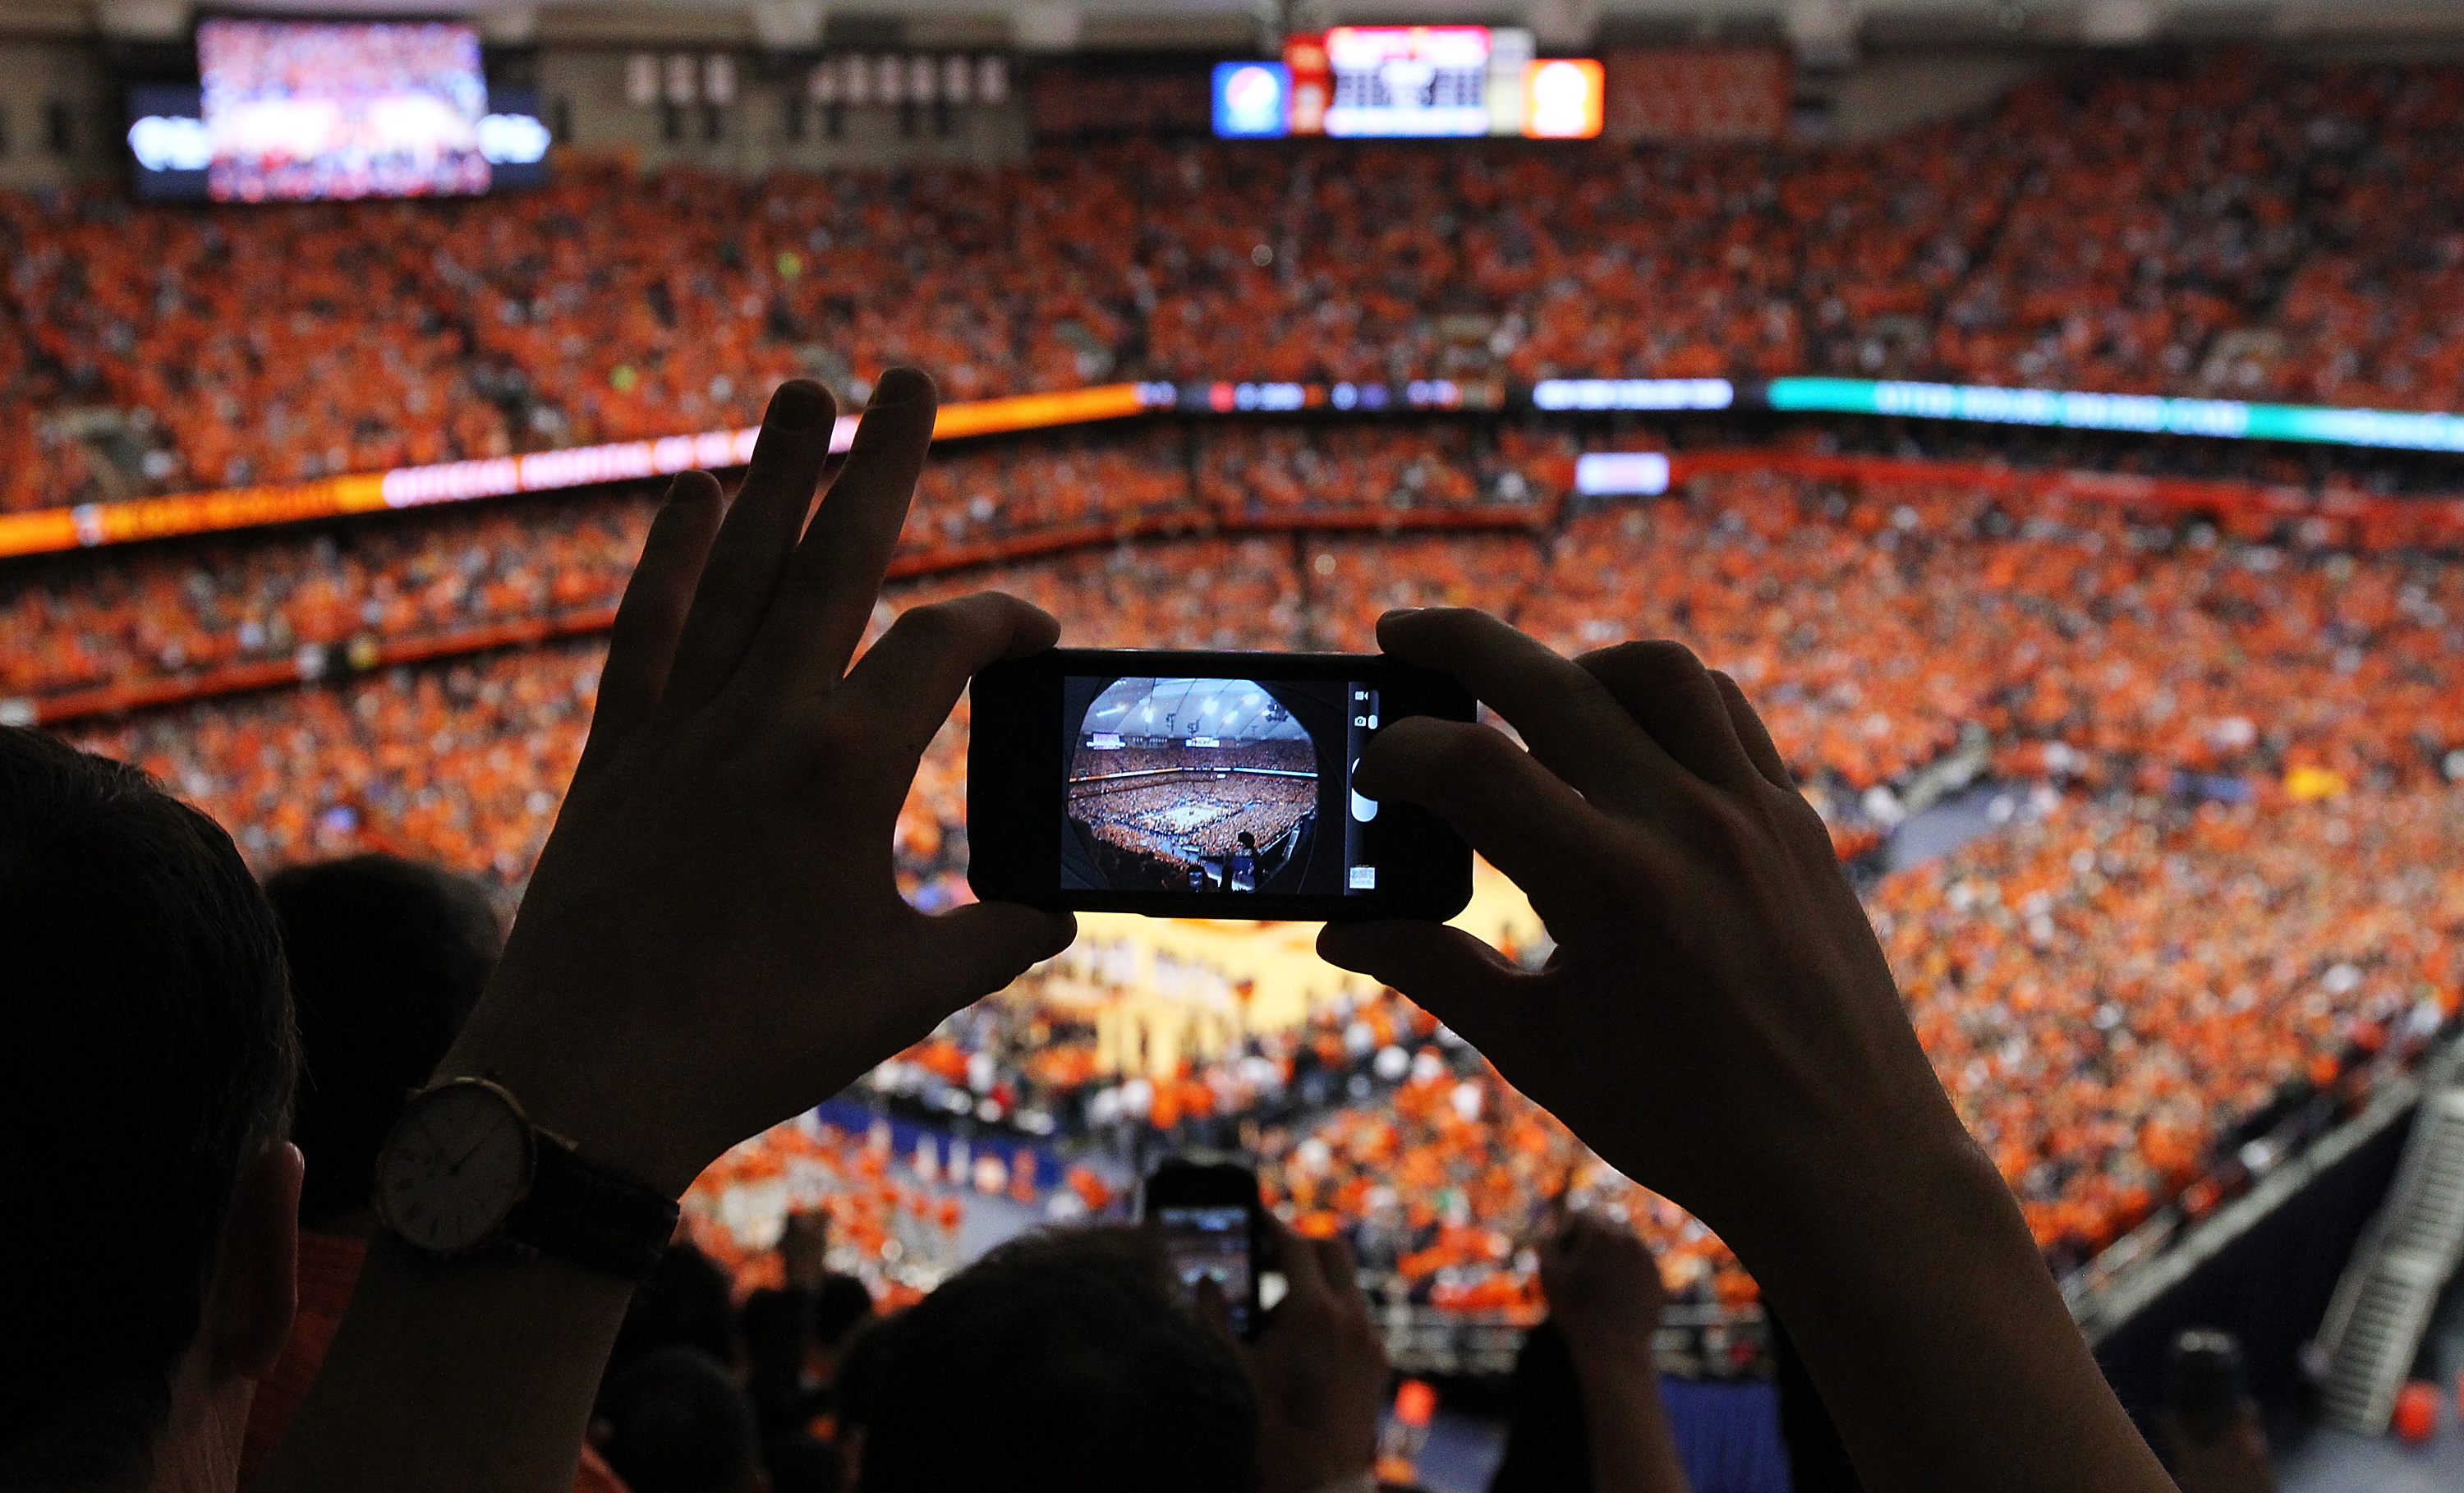 A general view of the Carrier Dome seen through a camera on an iPhone of a fan in the stands at the start of the game between the Syracuse Orange and the Georgetown Hoyas on February 23, 2013 in Syracuse, New York. (Nate Shron&mdash;Getty Images)